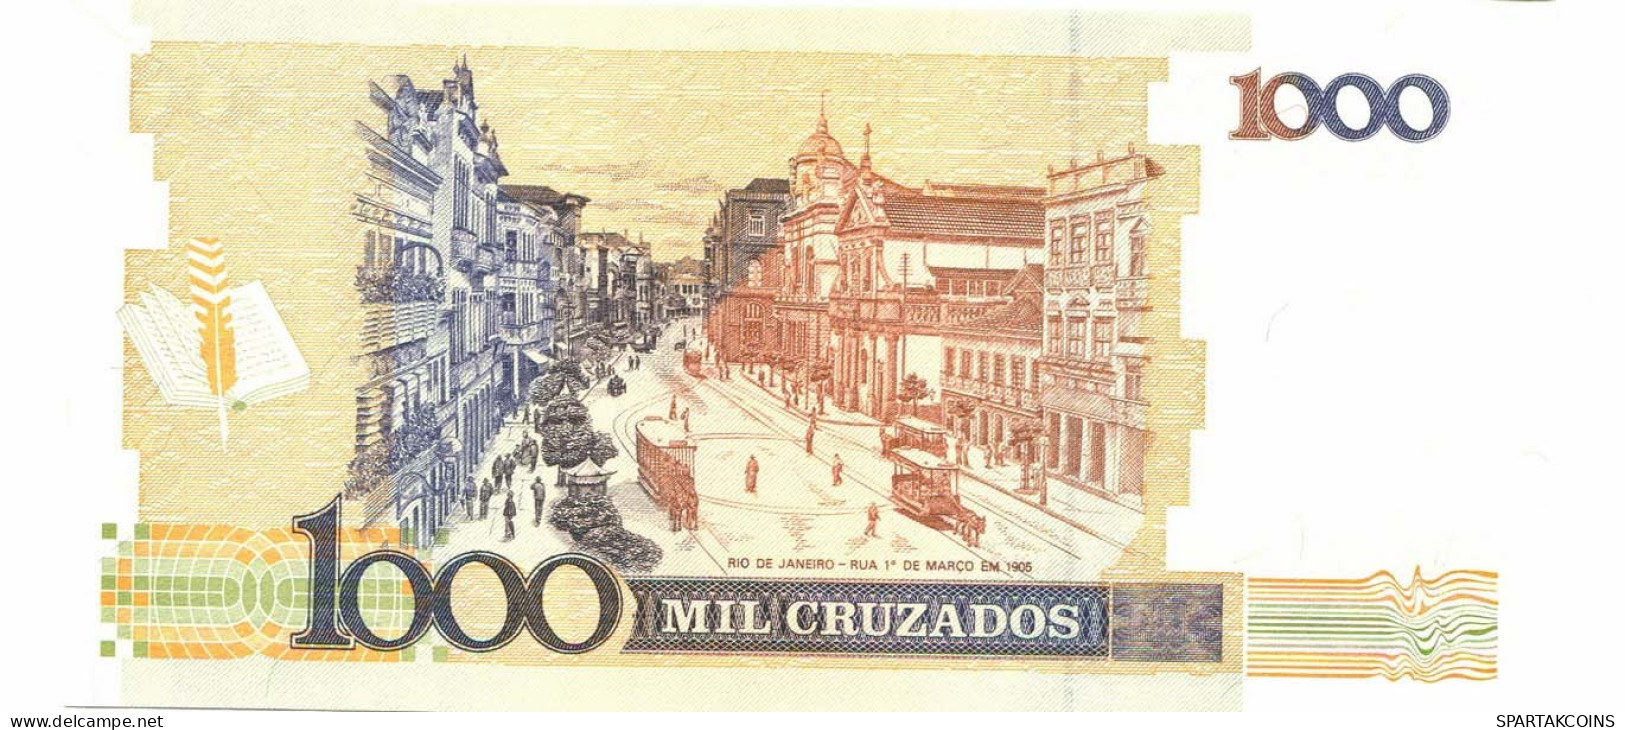 BRASIL 1000 CRUZADOS 1989 UNC Paper Money Banknote #P10872.4 - [11] Local Banknote Issues